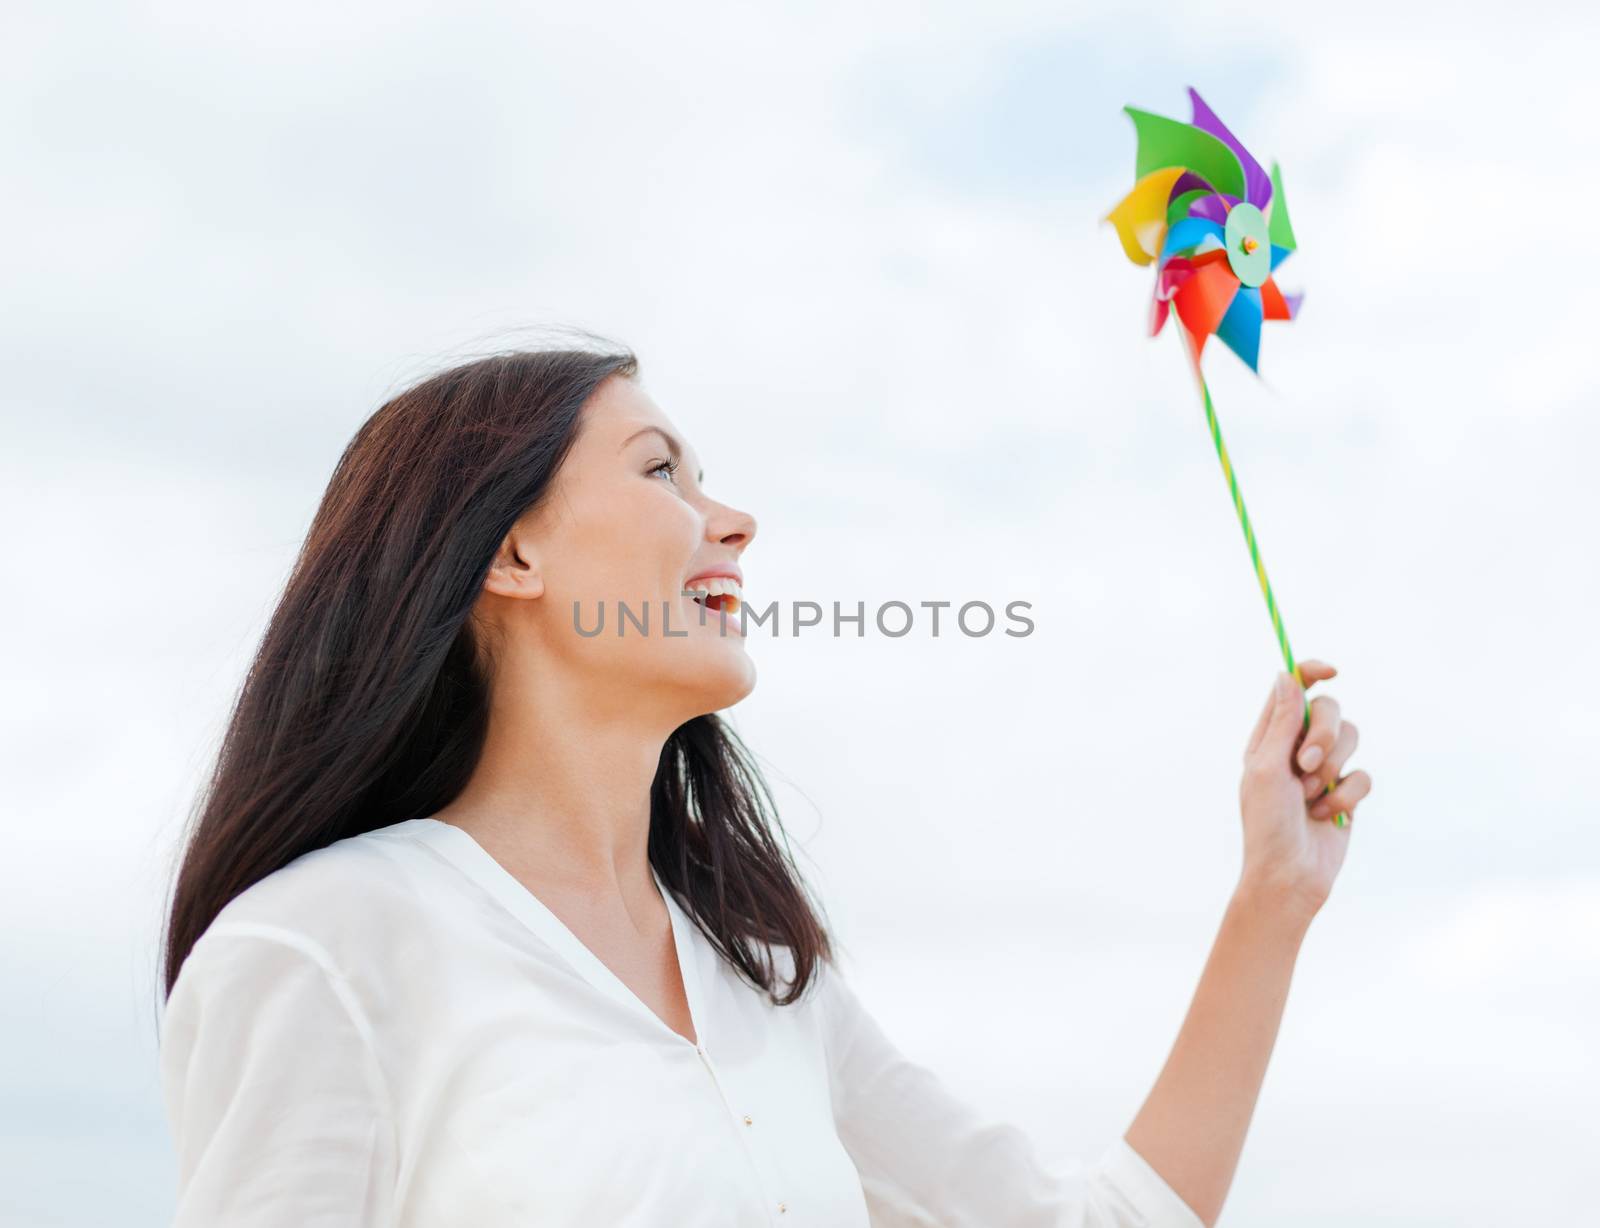 summer holidays, vacation and ecology concept - girl with windmill toy on the beach